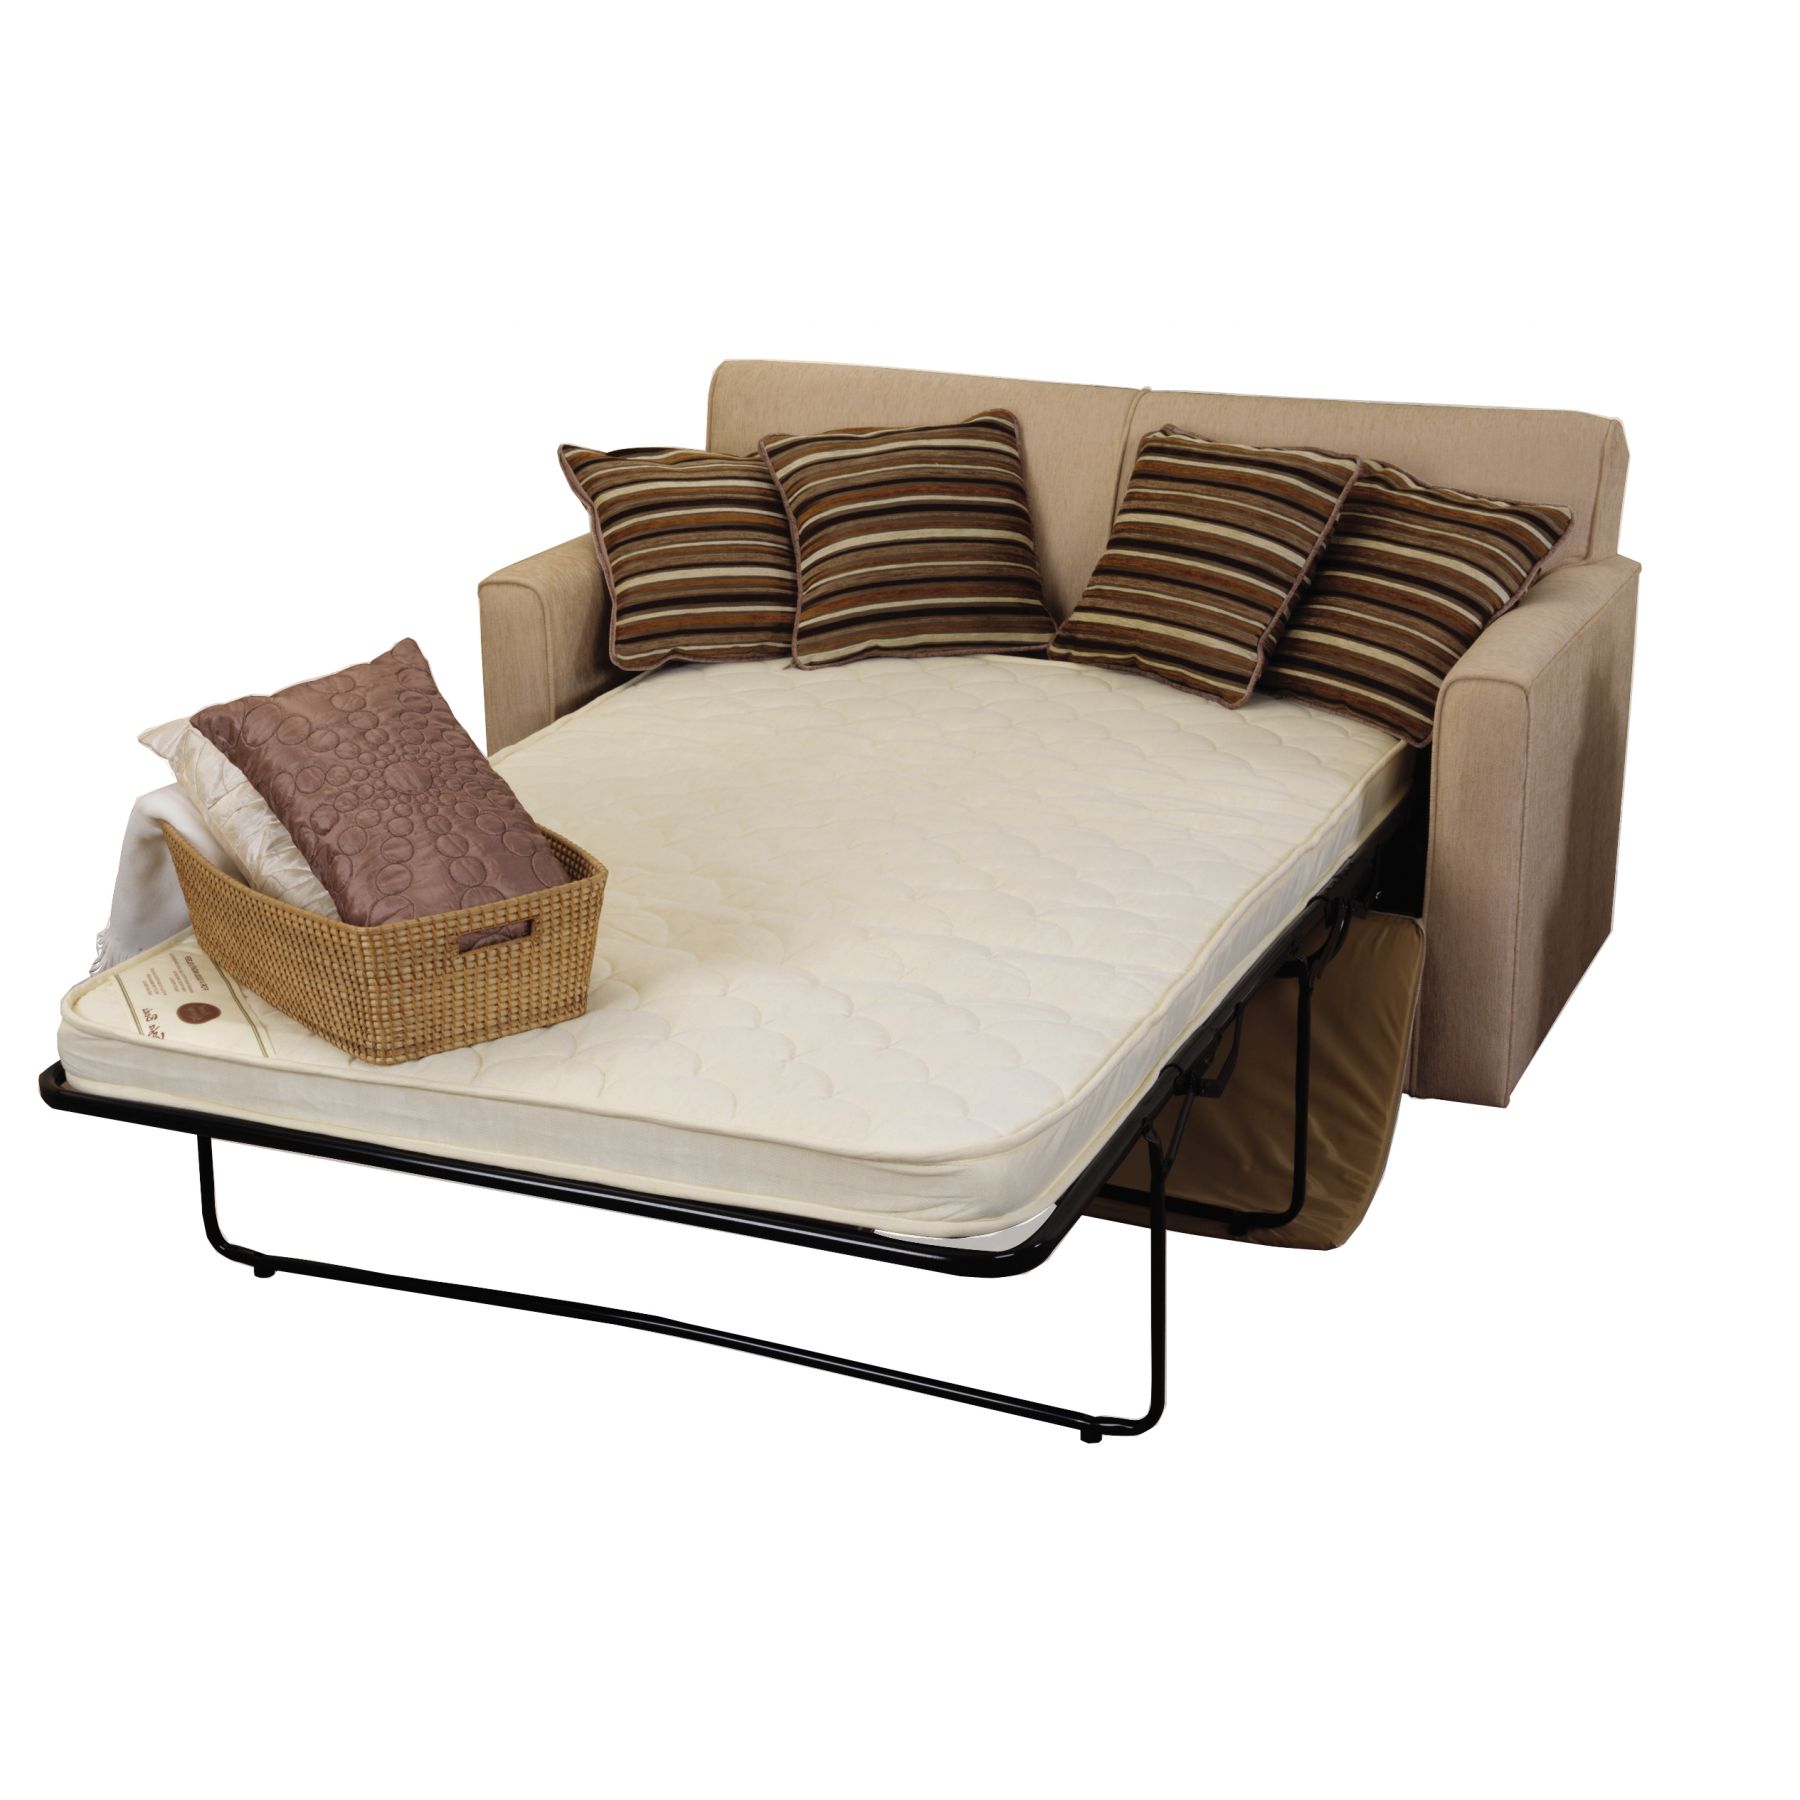 kentucky 2 seater double sofa bed HDPTEJW